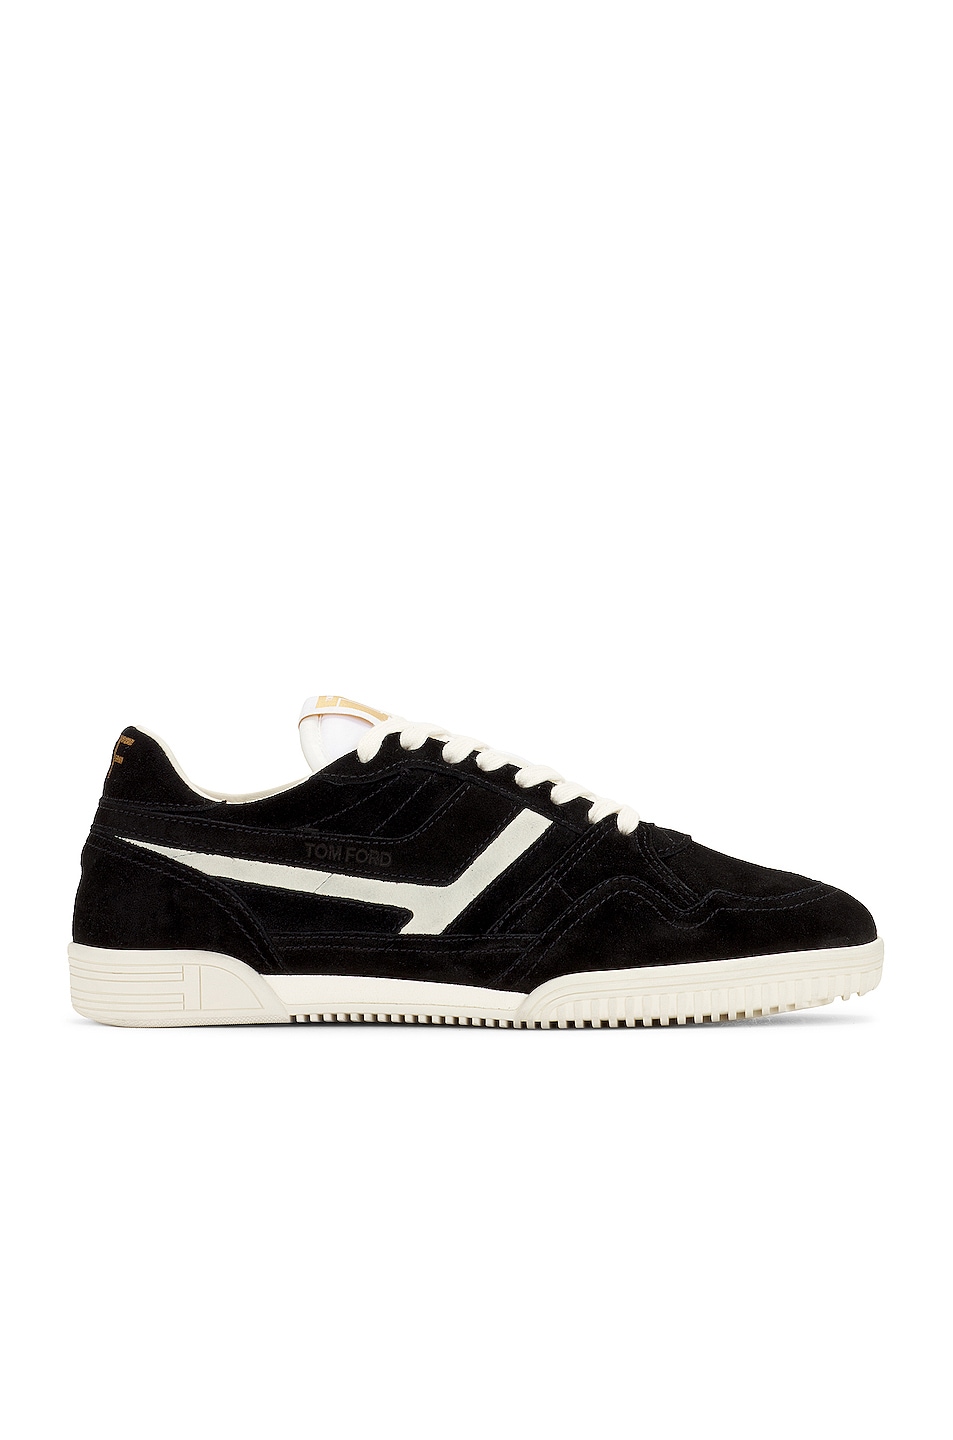 Image 1 of TOM FORD Suede Leather Low Top Sneakers in Black